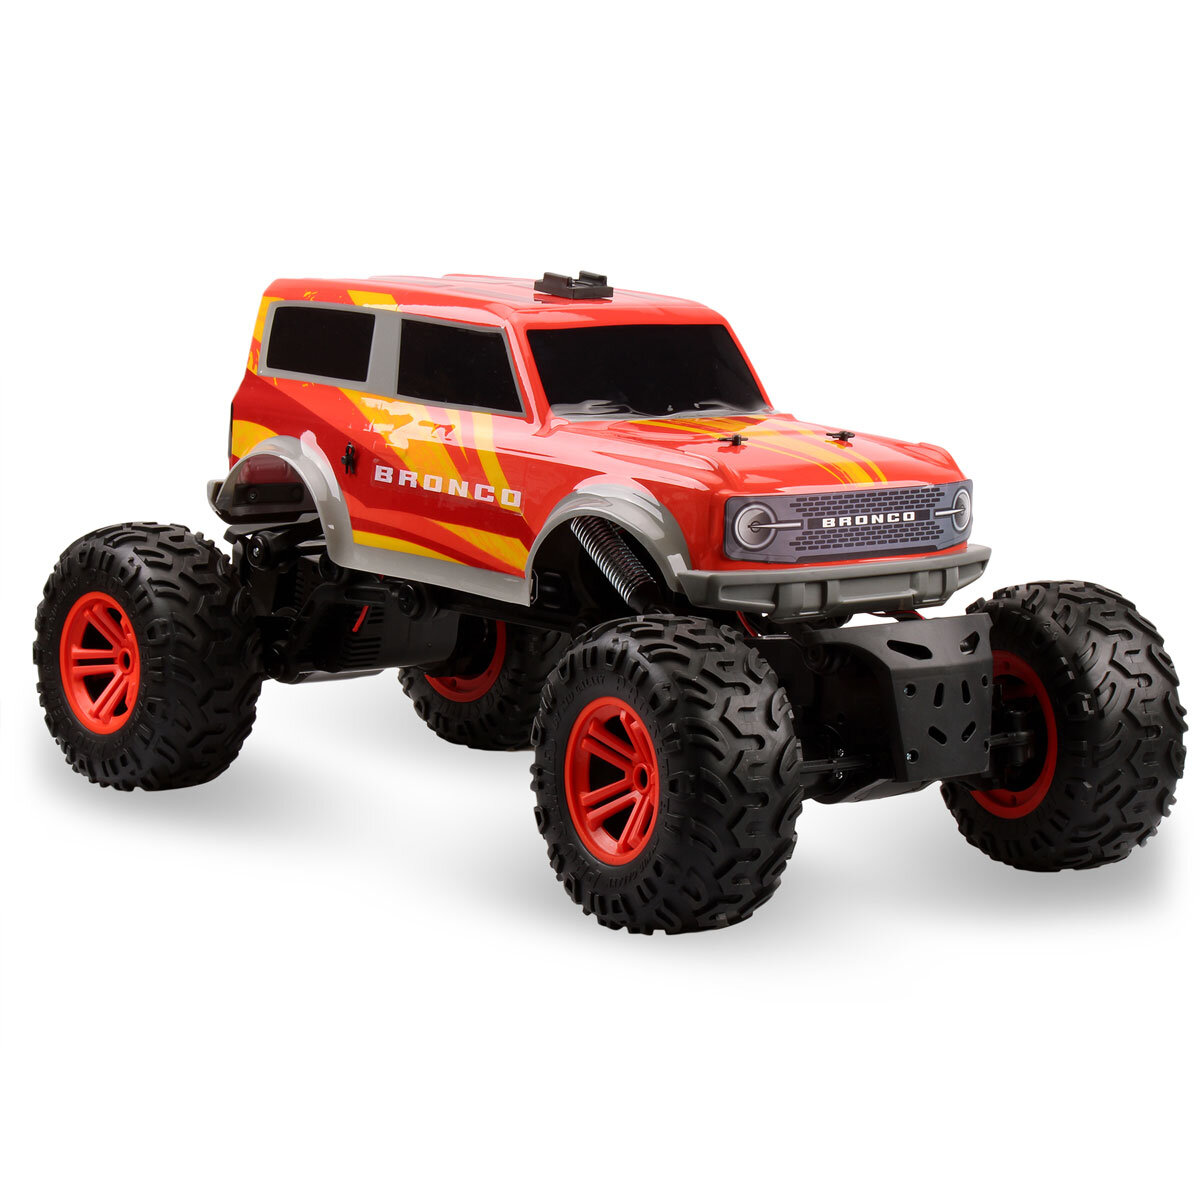 Buy Power Drive Bronco Monster Truck Image at Costco.co.uk